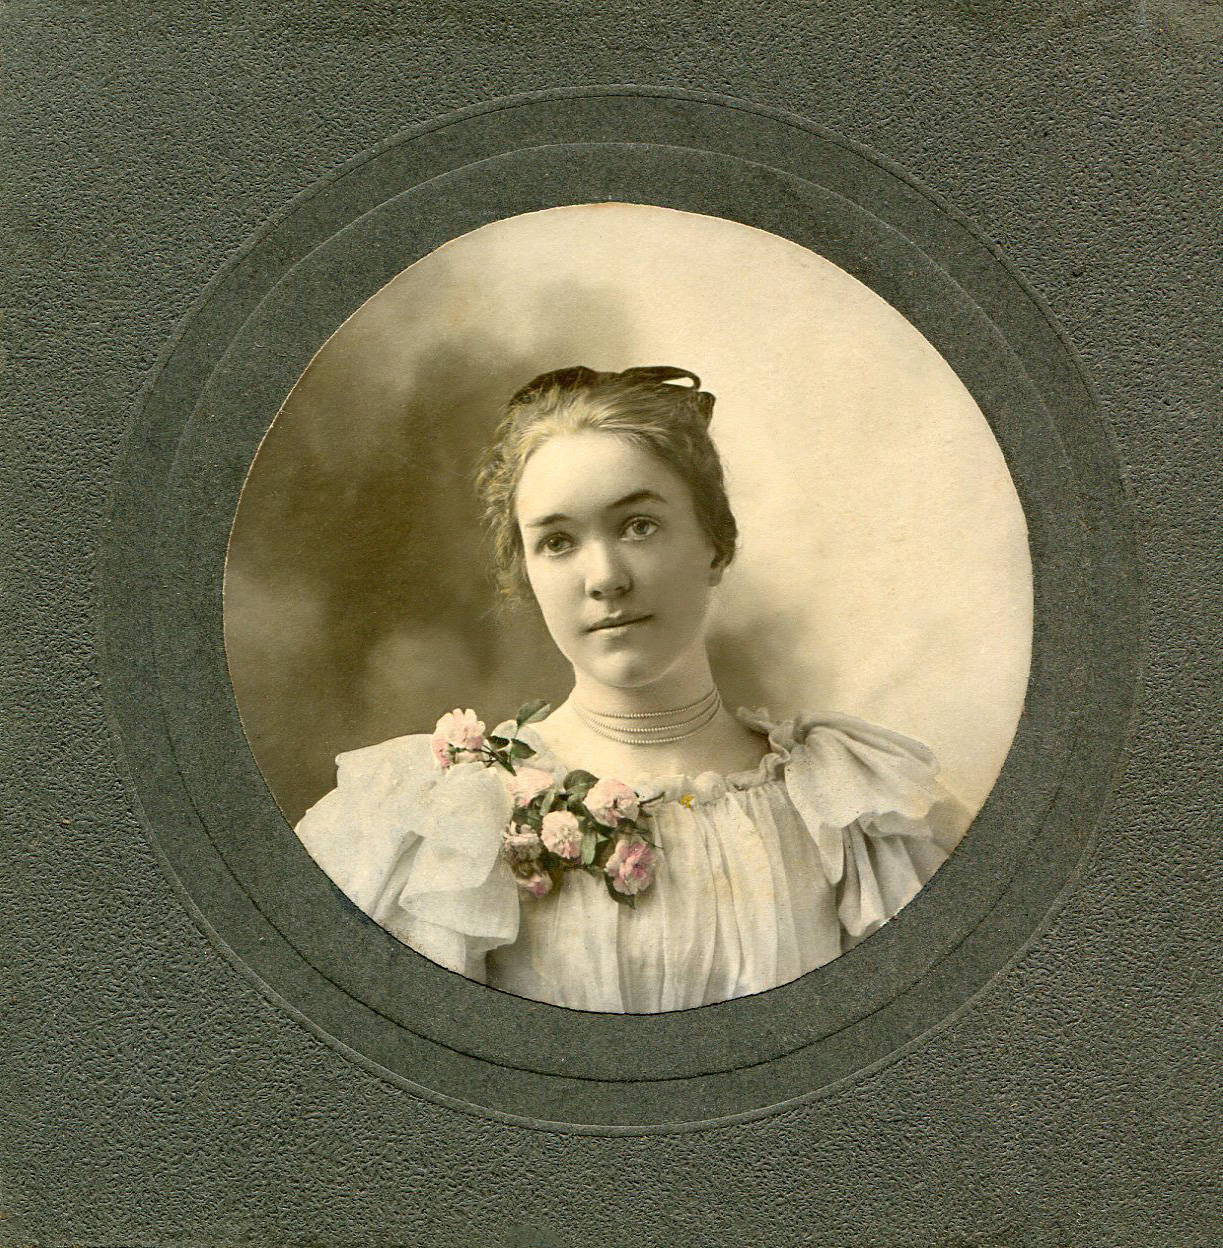 This is a distant cousin, Miss Emma Scott (1883, Iowa - 1970). She was the daughter of Lauren A. Scott and Fannie Childs, wife of Orland Harrison Bailey. View full size.